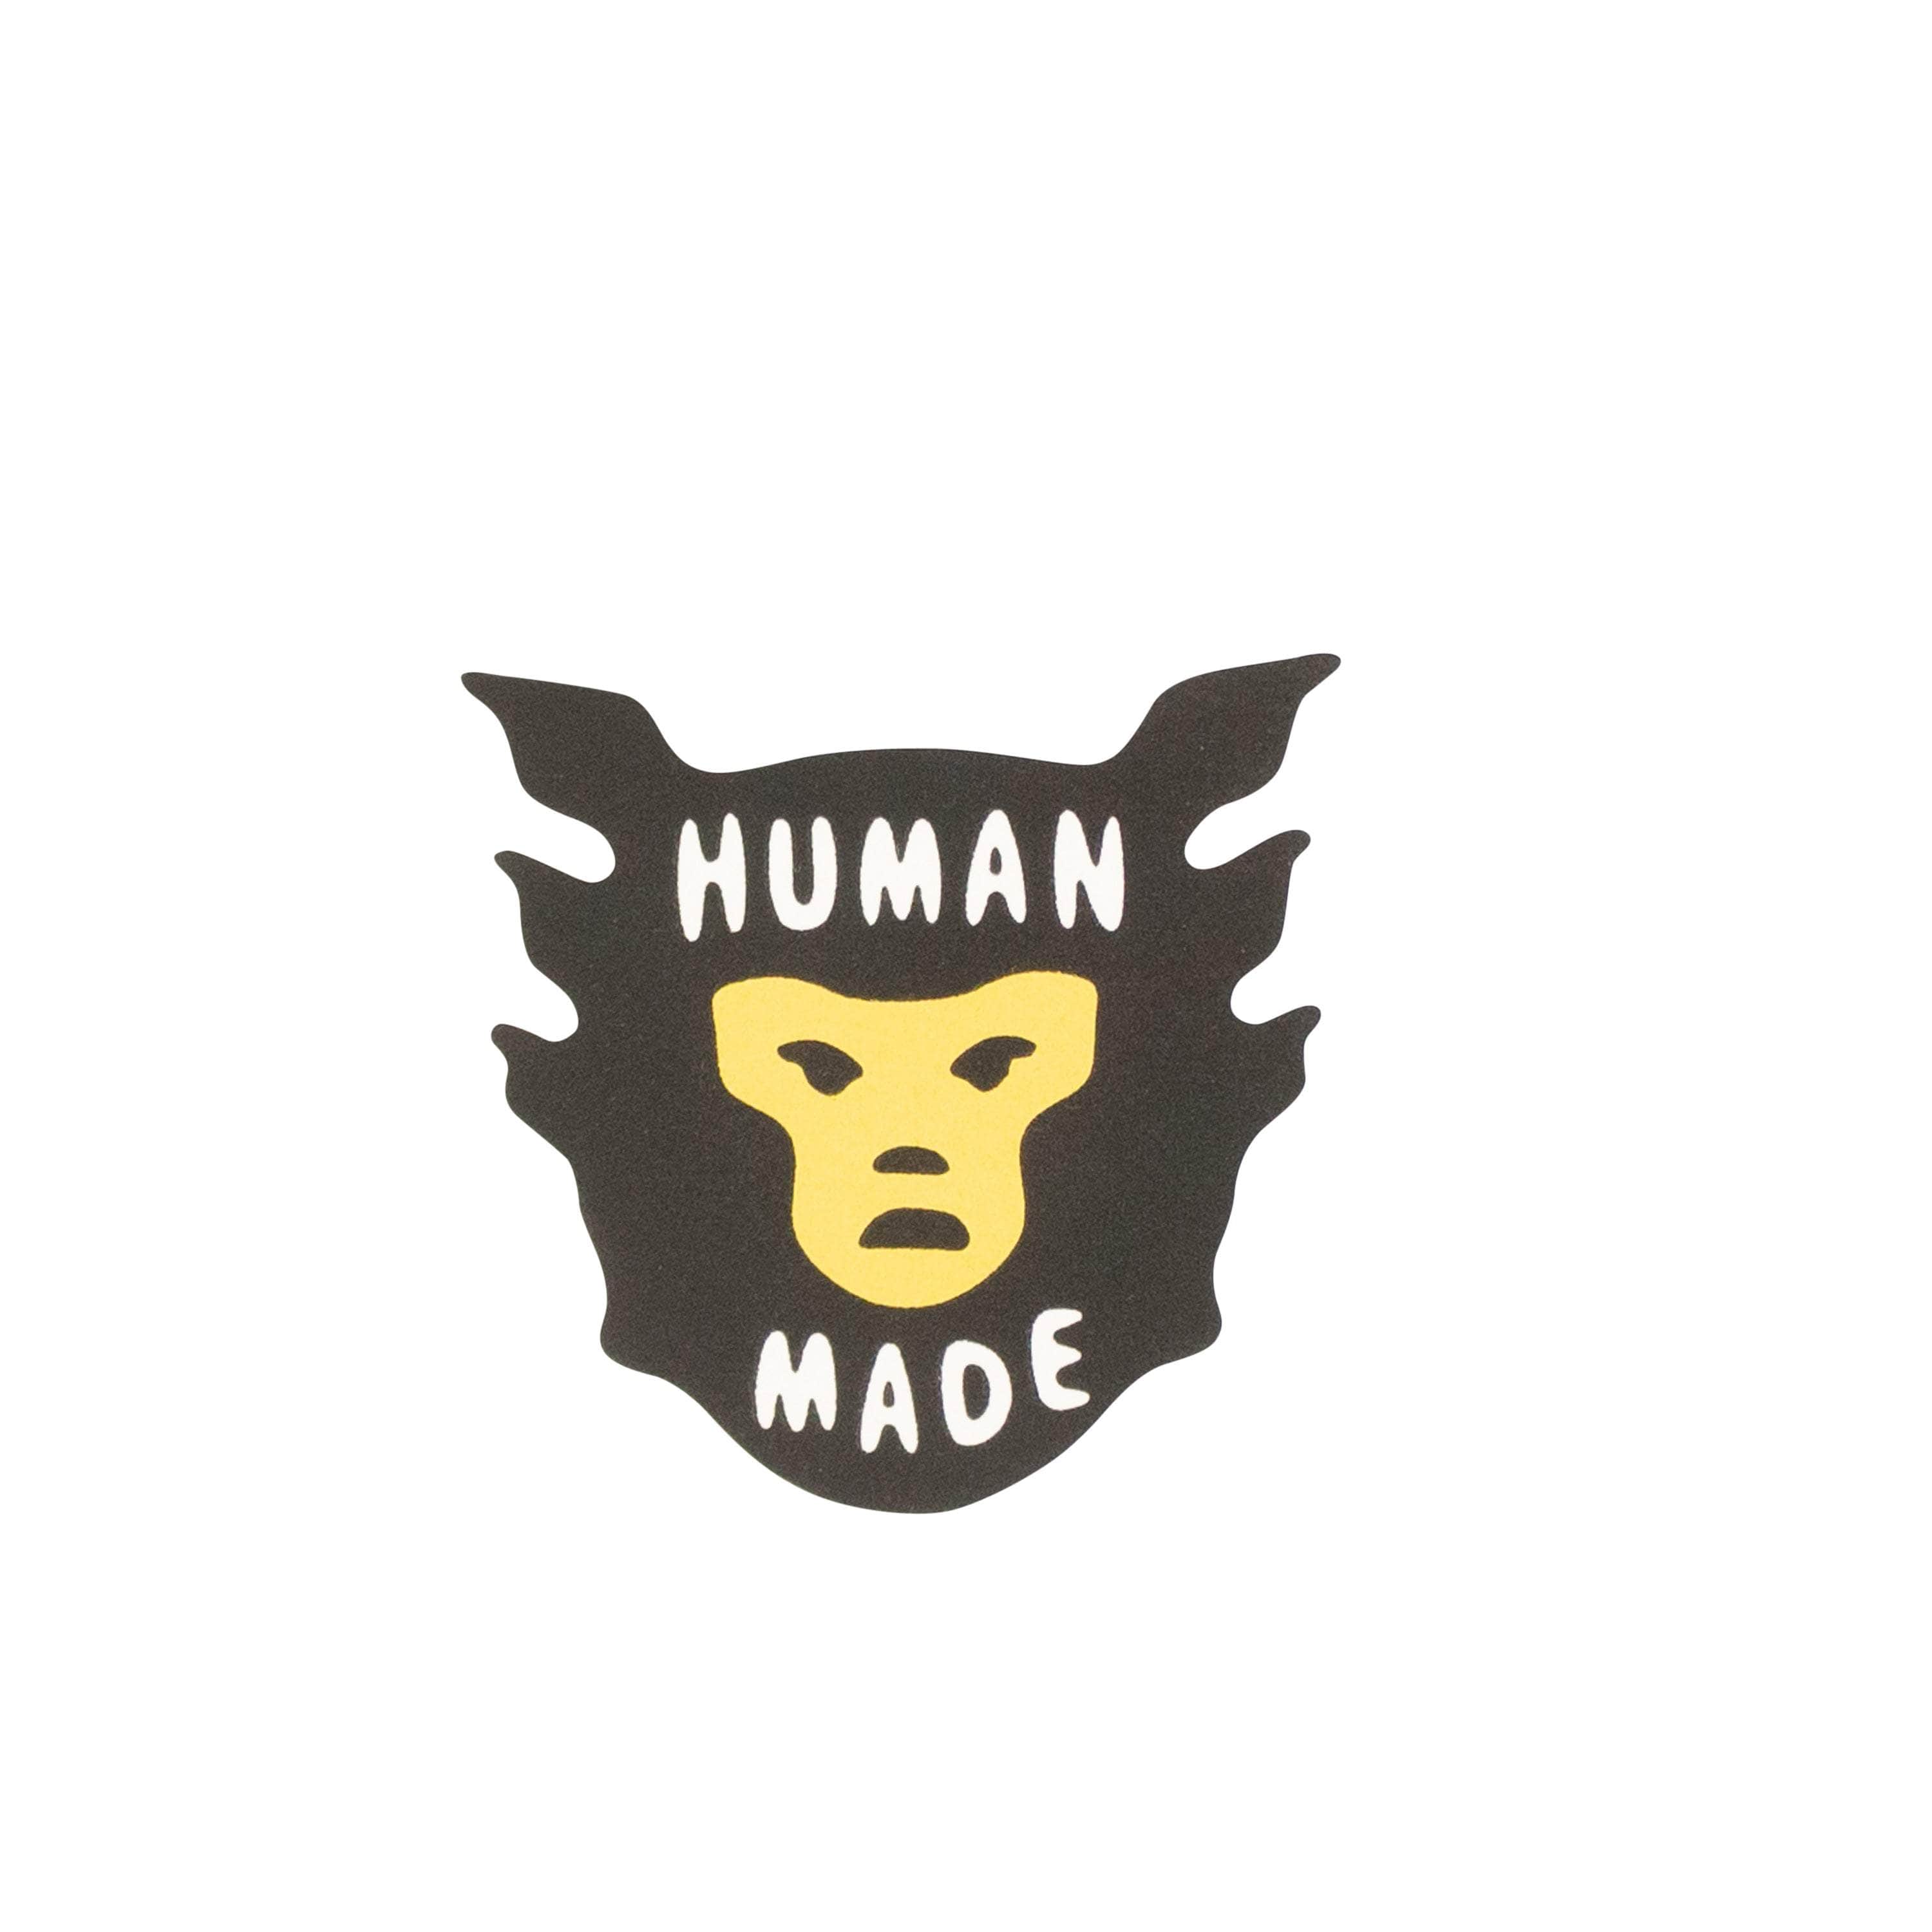 Human Made channelenable-all, chicmi, couponcollection, gender-mens, gender-womens, human-made, kitchen-decor, main-accessories, mens-shoes, shop375, size-os, under-250 OS Black Logo Beverage Coaster HMD-XACC-0005/OS HMD-XACC-0005/OS